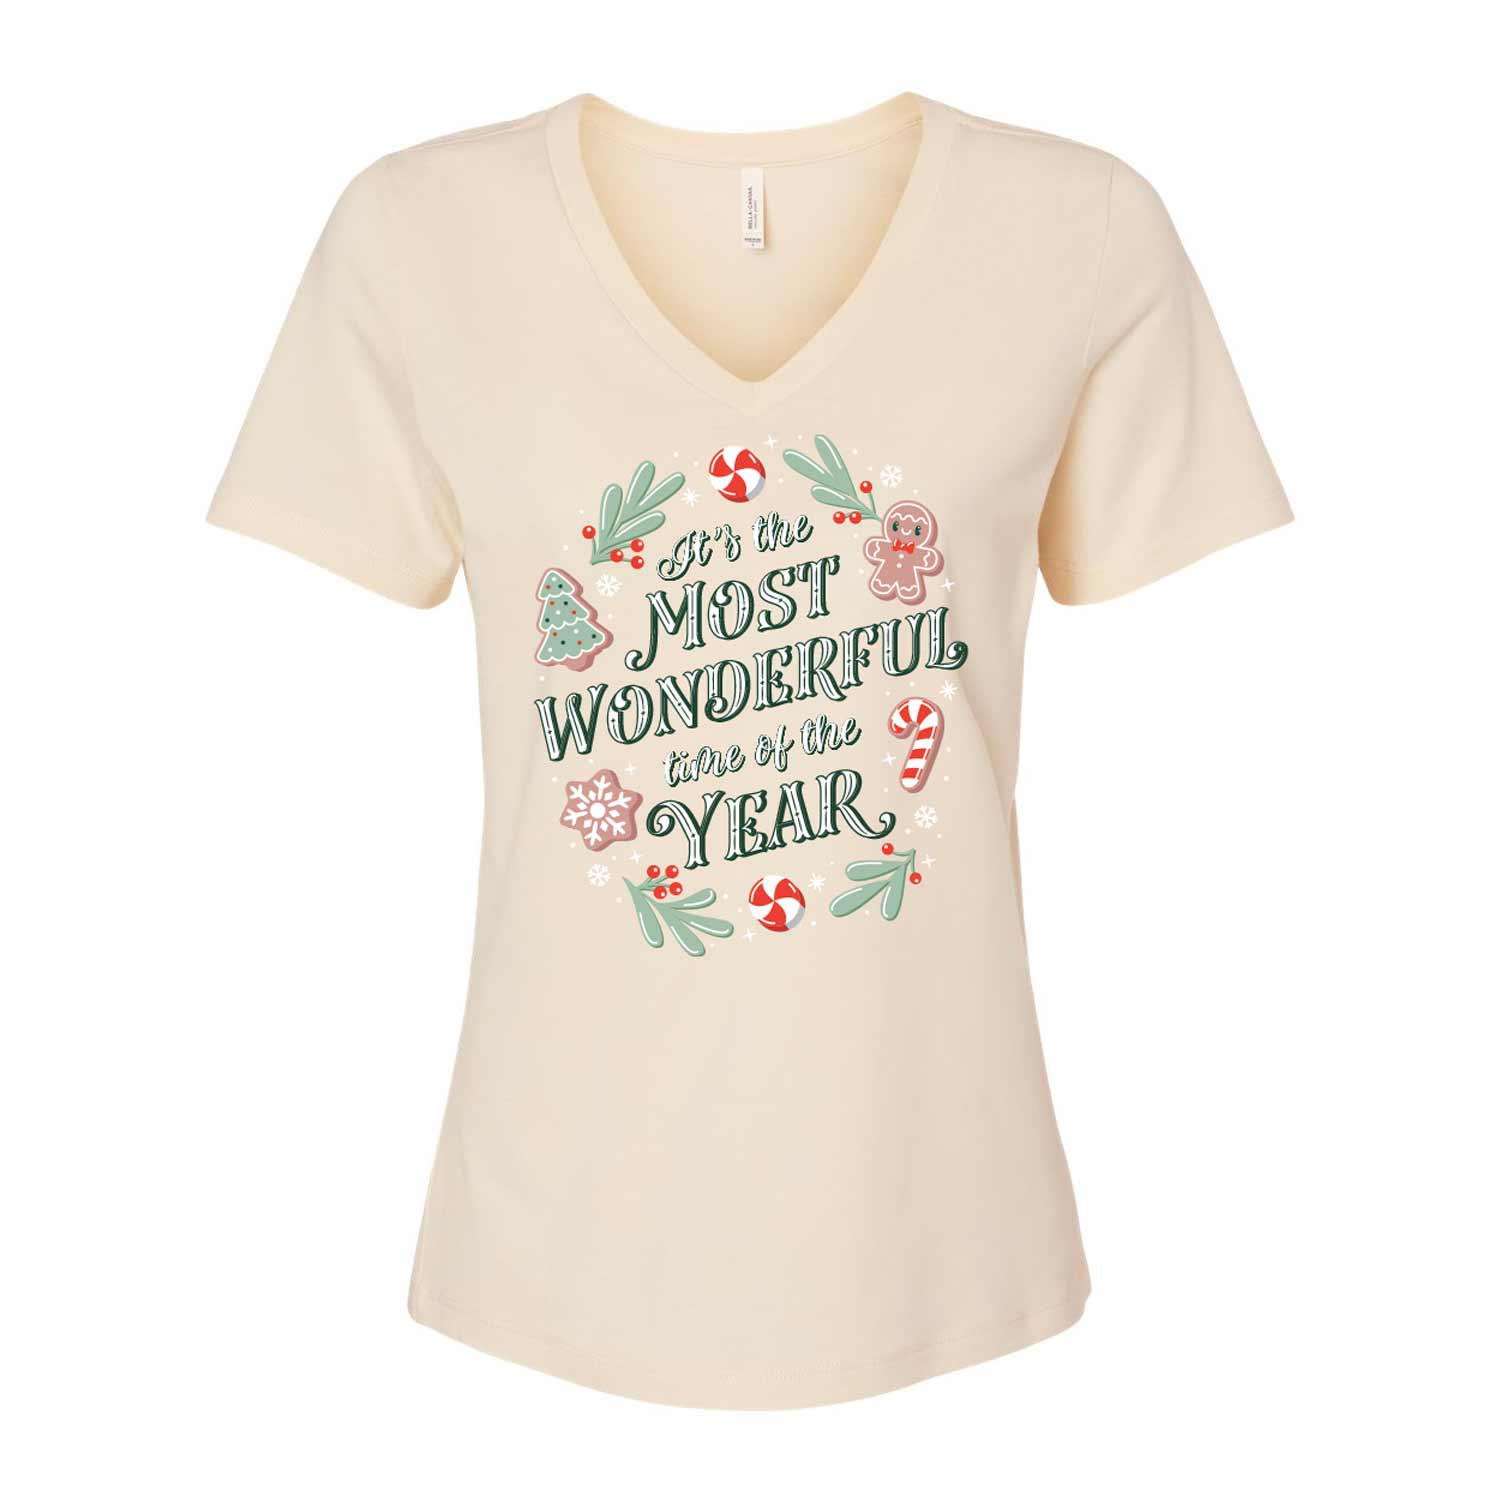 It's the Most Wonderful Time of the Year Ladies V-Neck T-Shirt